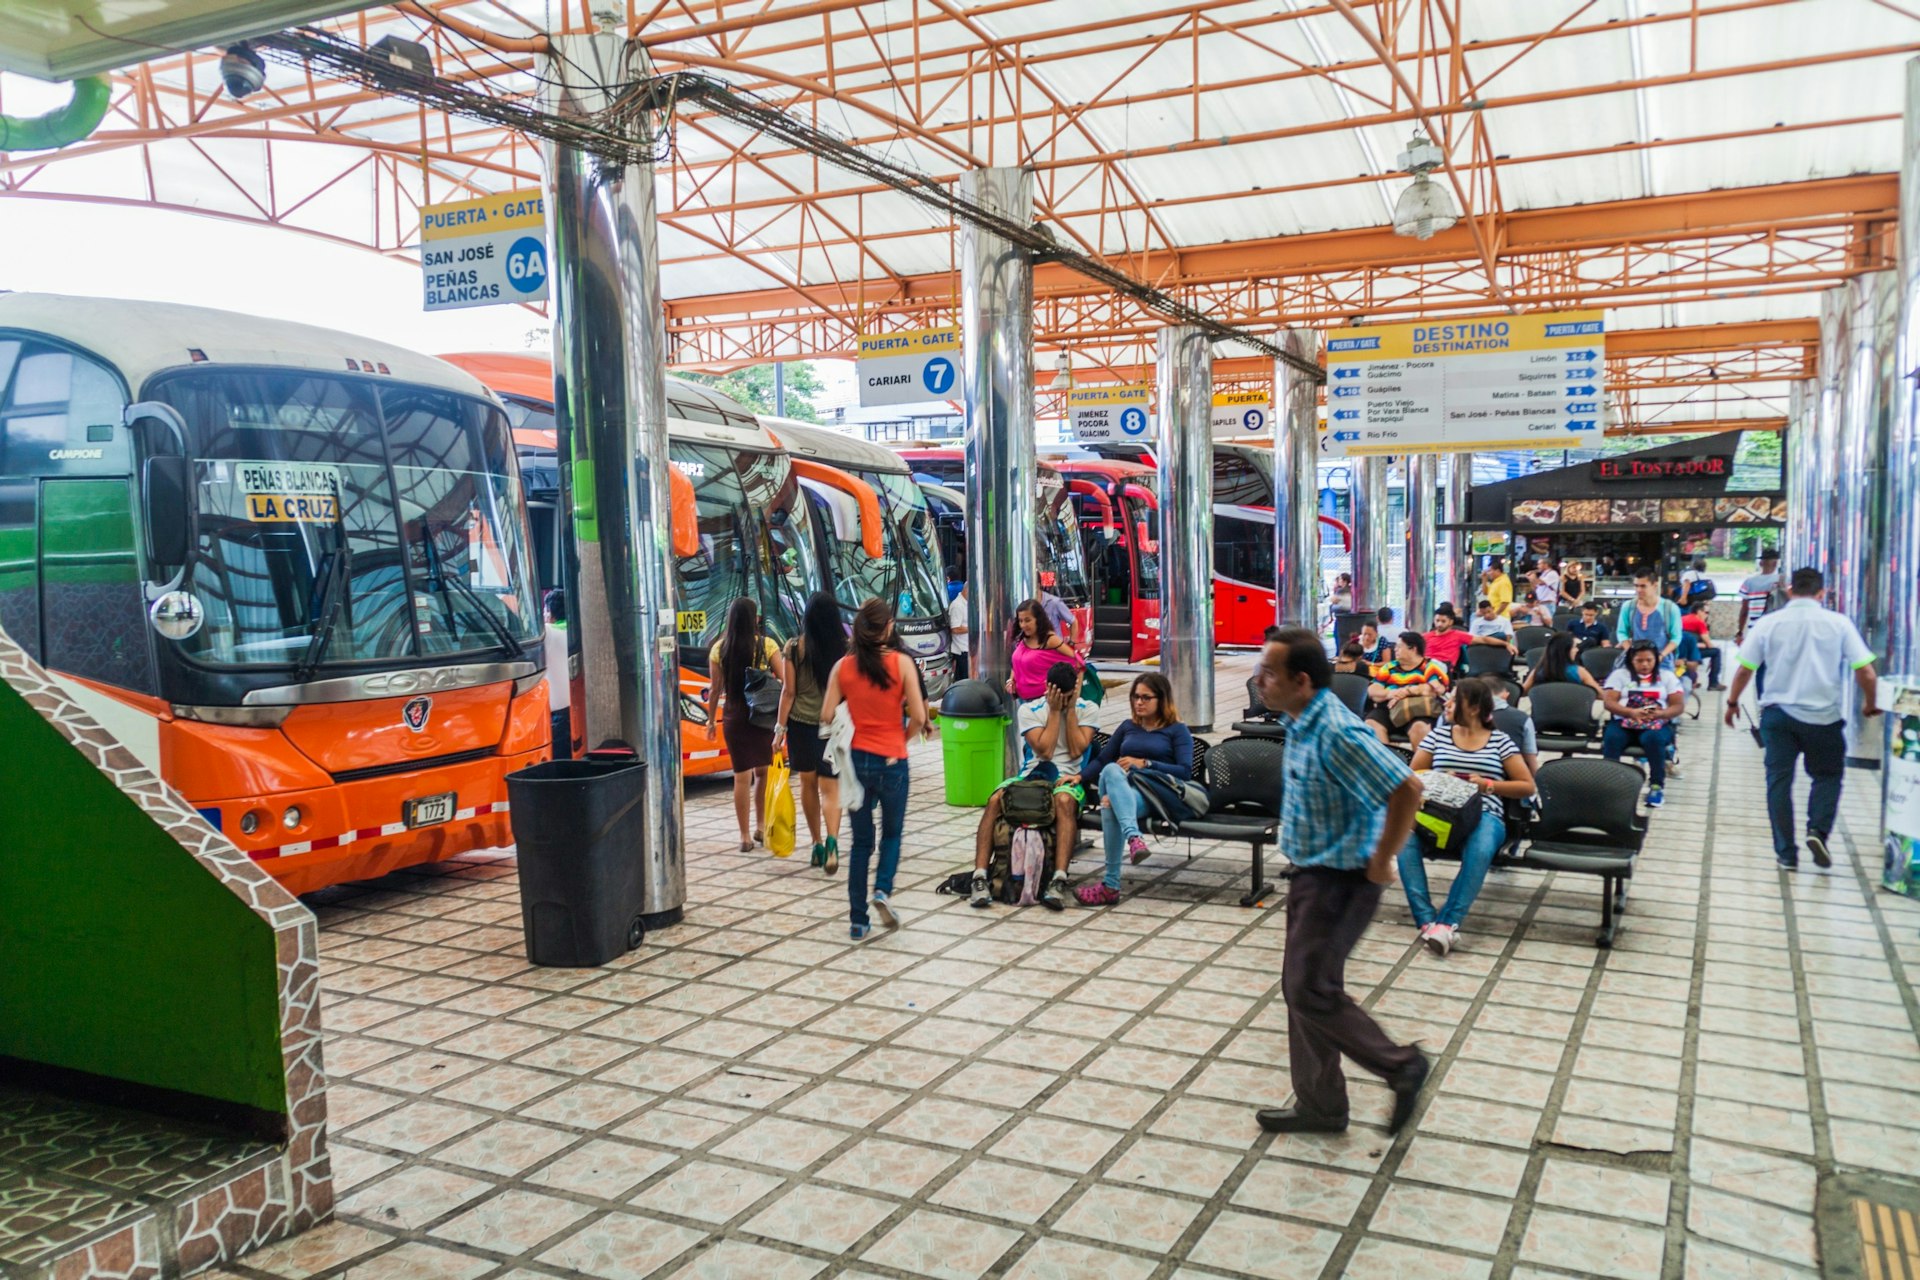 Many people mill around and wait to board the buses parked up at the Gran Terminal del Caribe bus station San José, Costa Rica